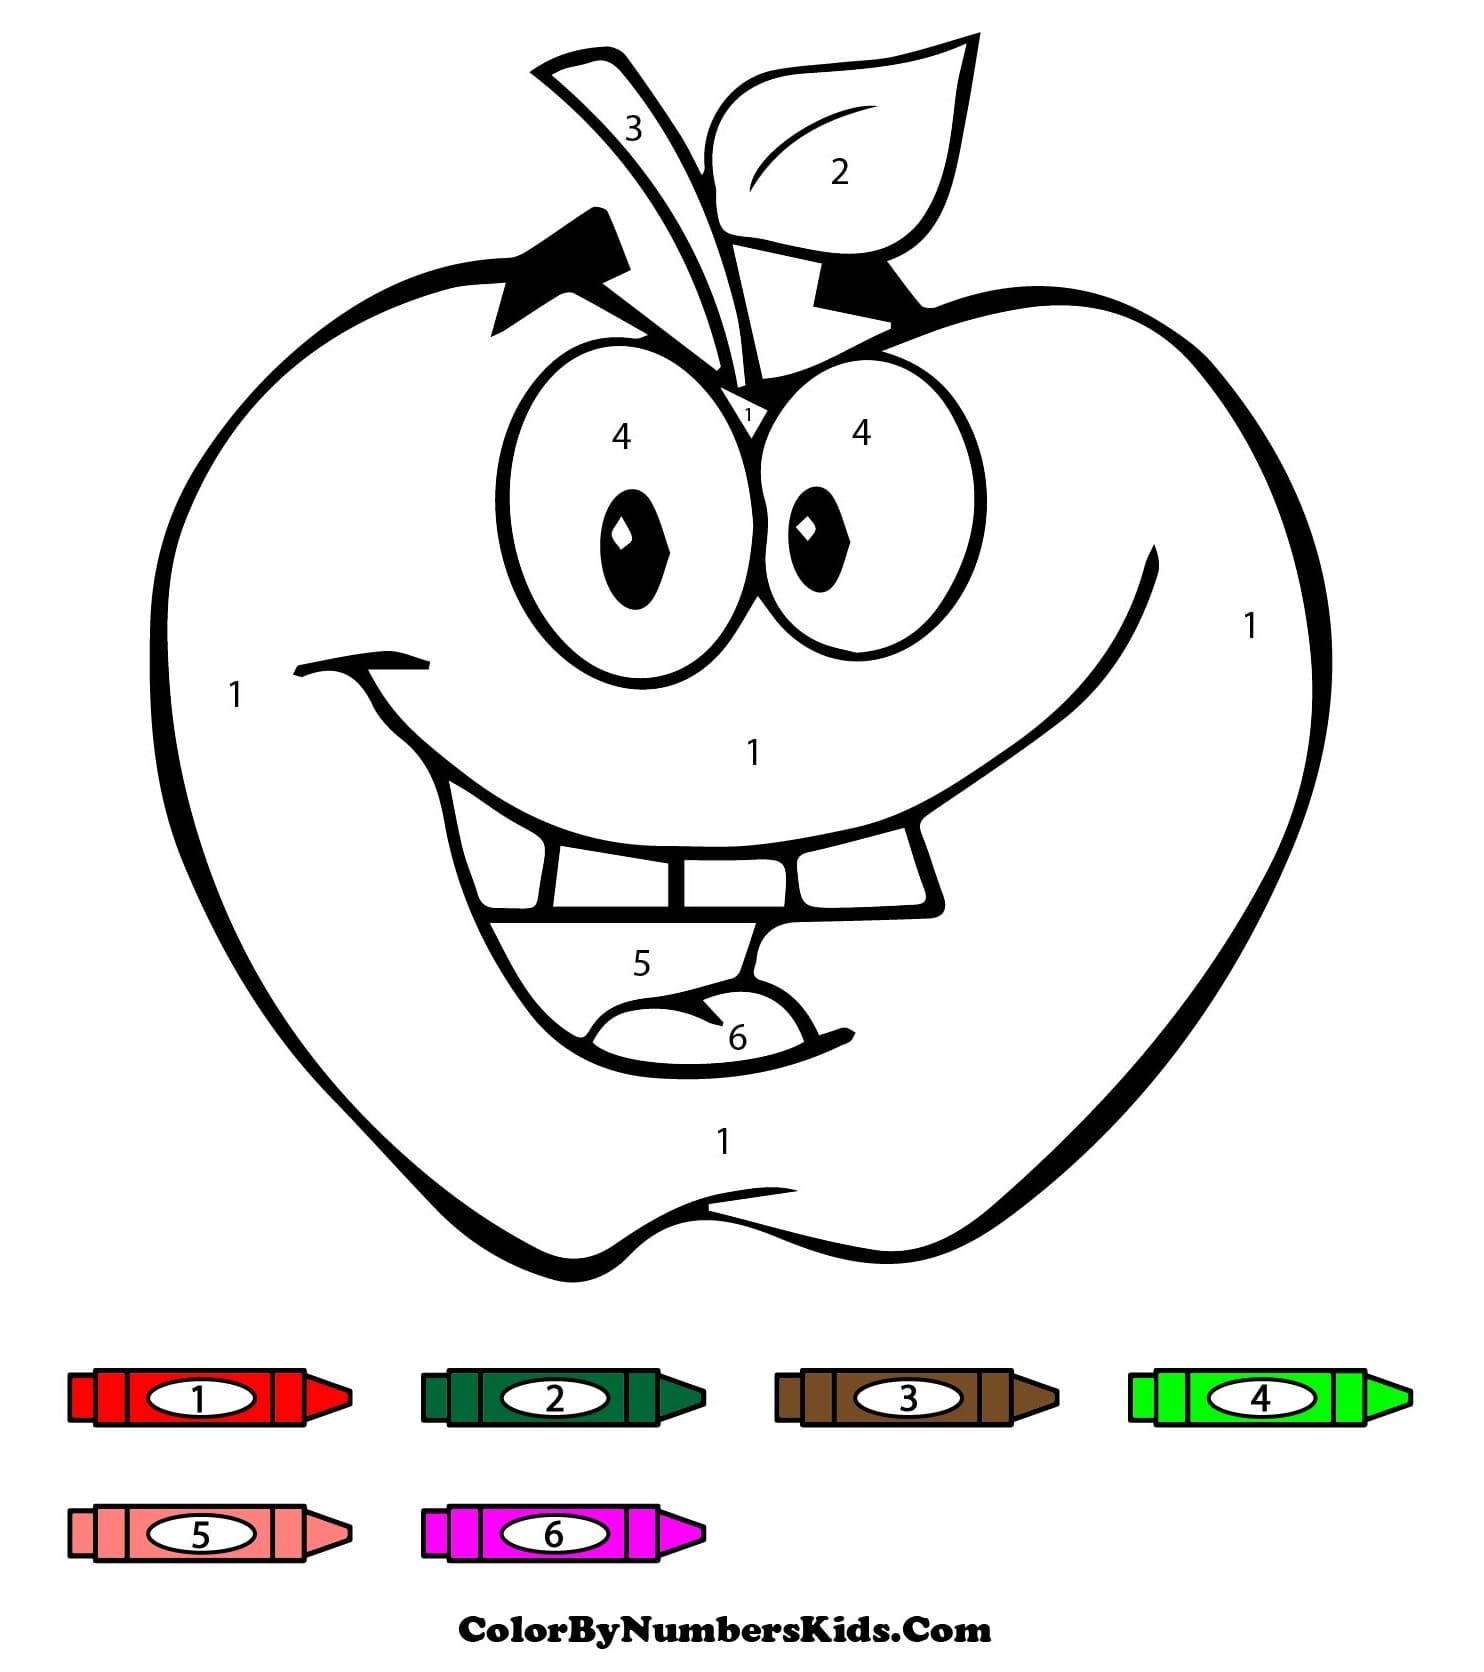 Cartoon Apple Color By Number For Kids